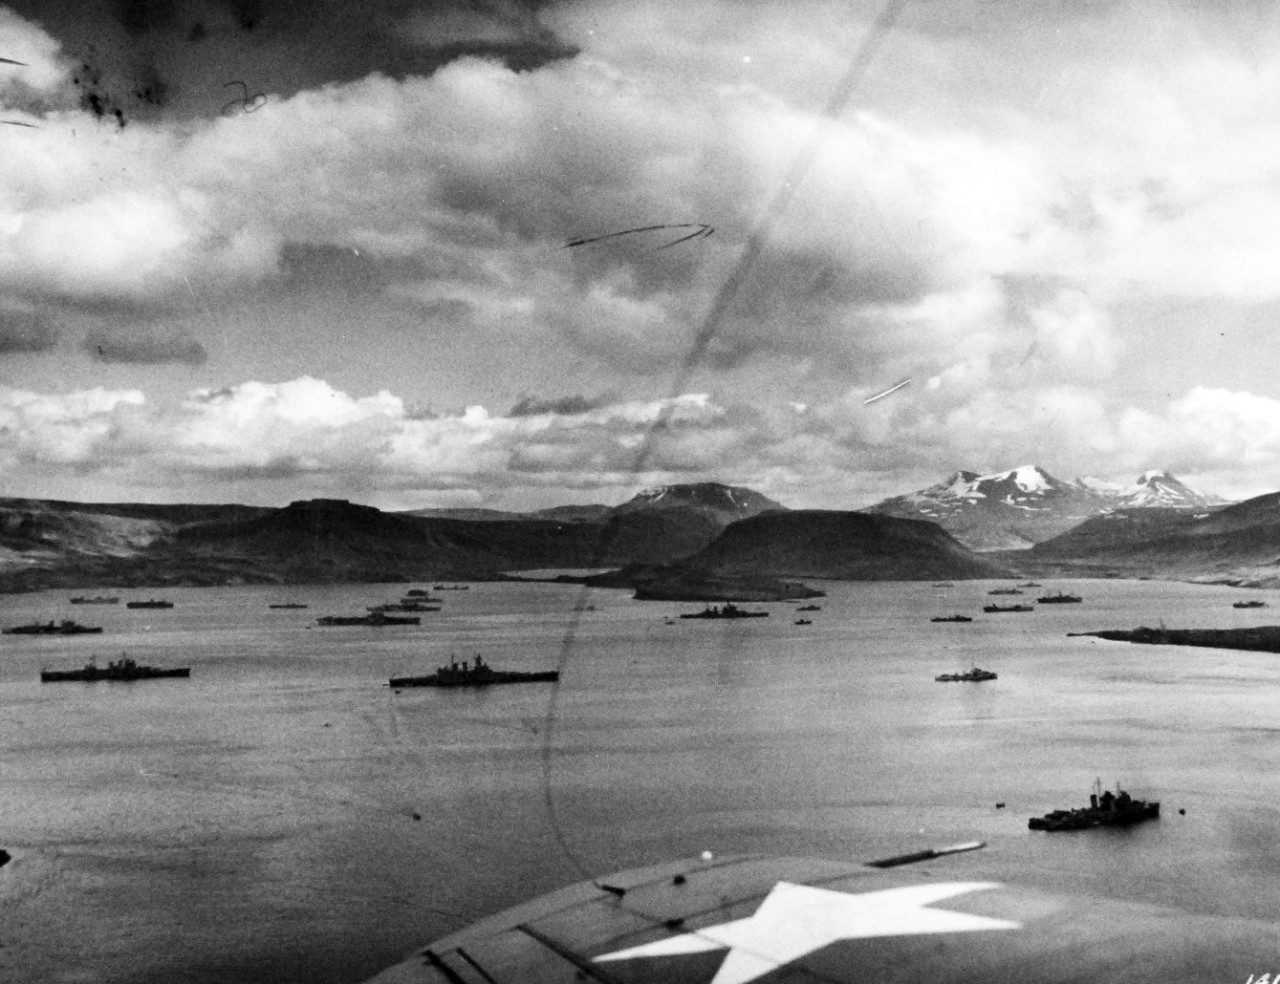 <p>80-G-24830: PQ-17 Arctic Convoy, June-July 1942. The covering forces of the PQ-17 Convoy (British and American ships) at anchor in the harbor at Hvalfjord, Iceland.&nbsp;</p>
